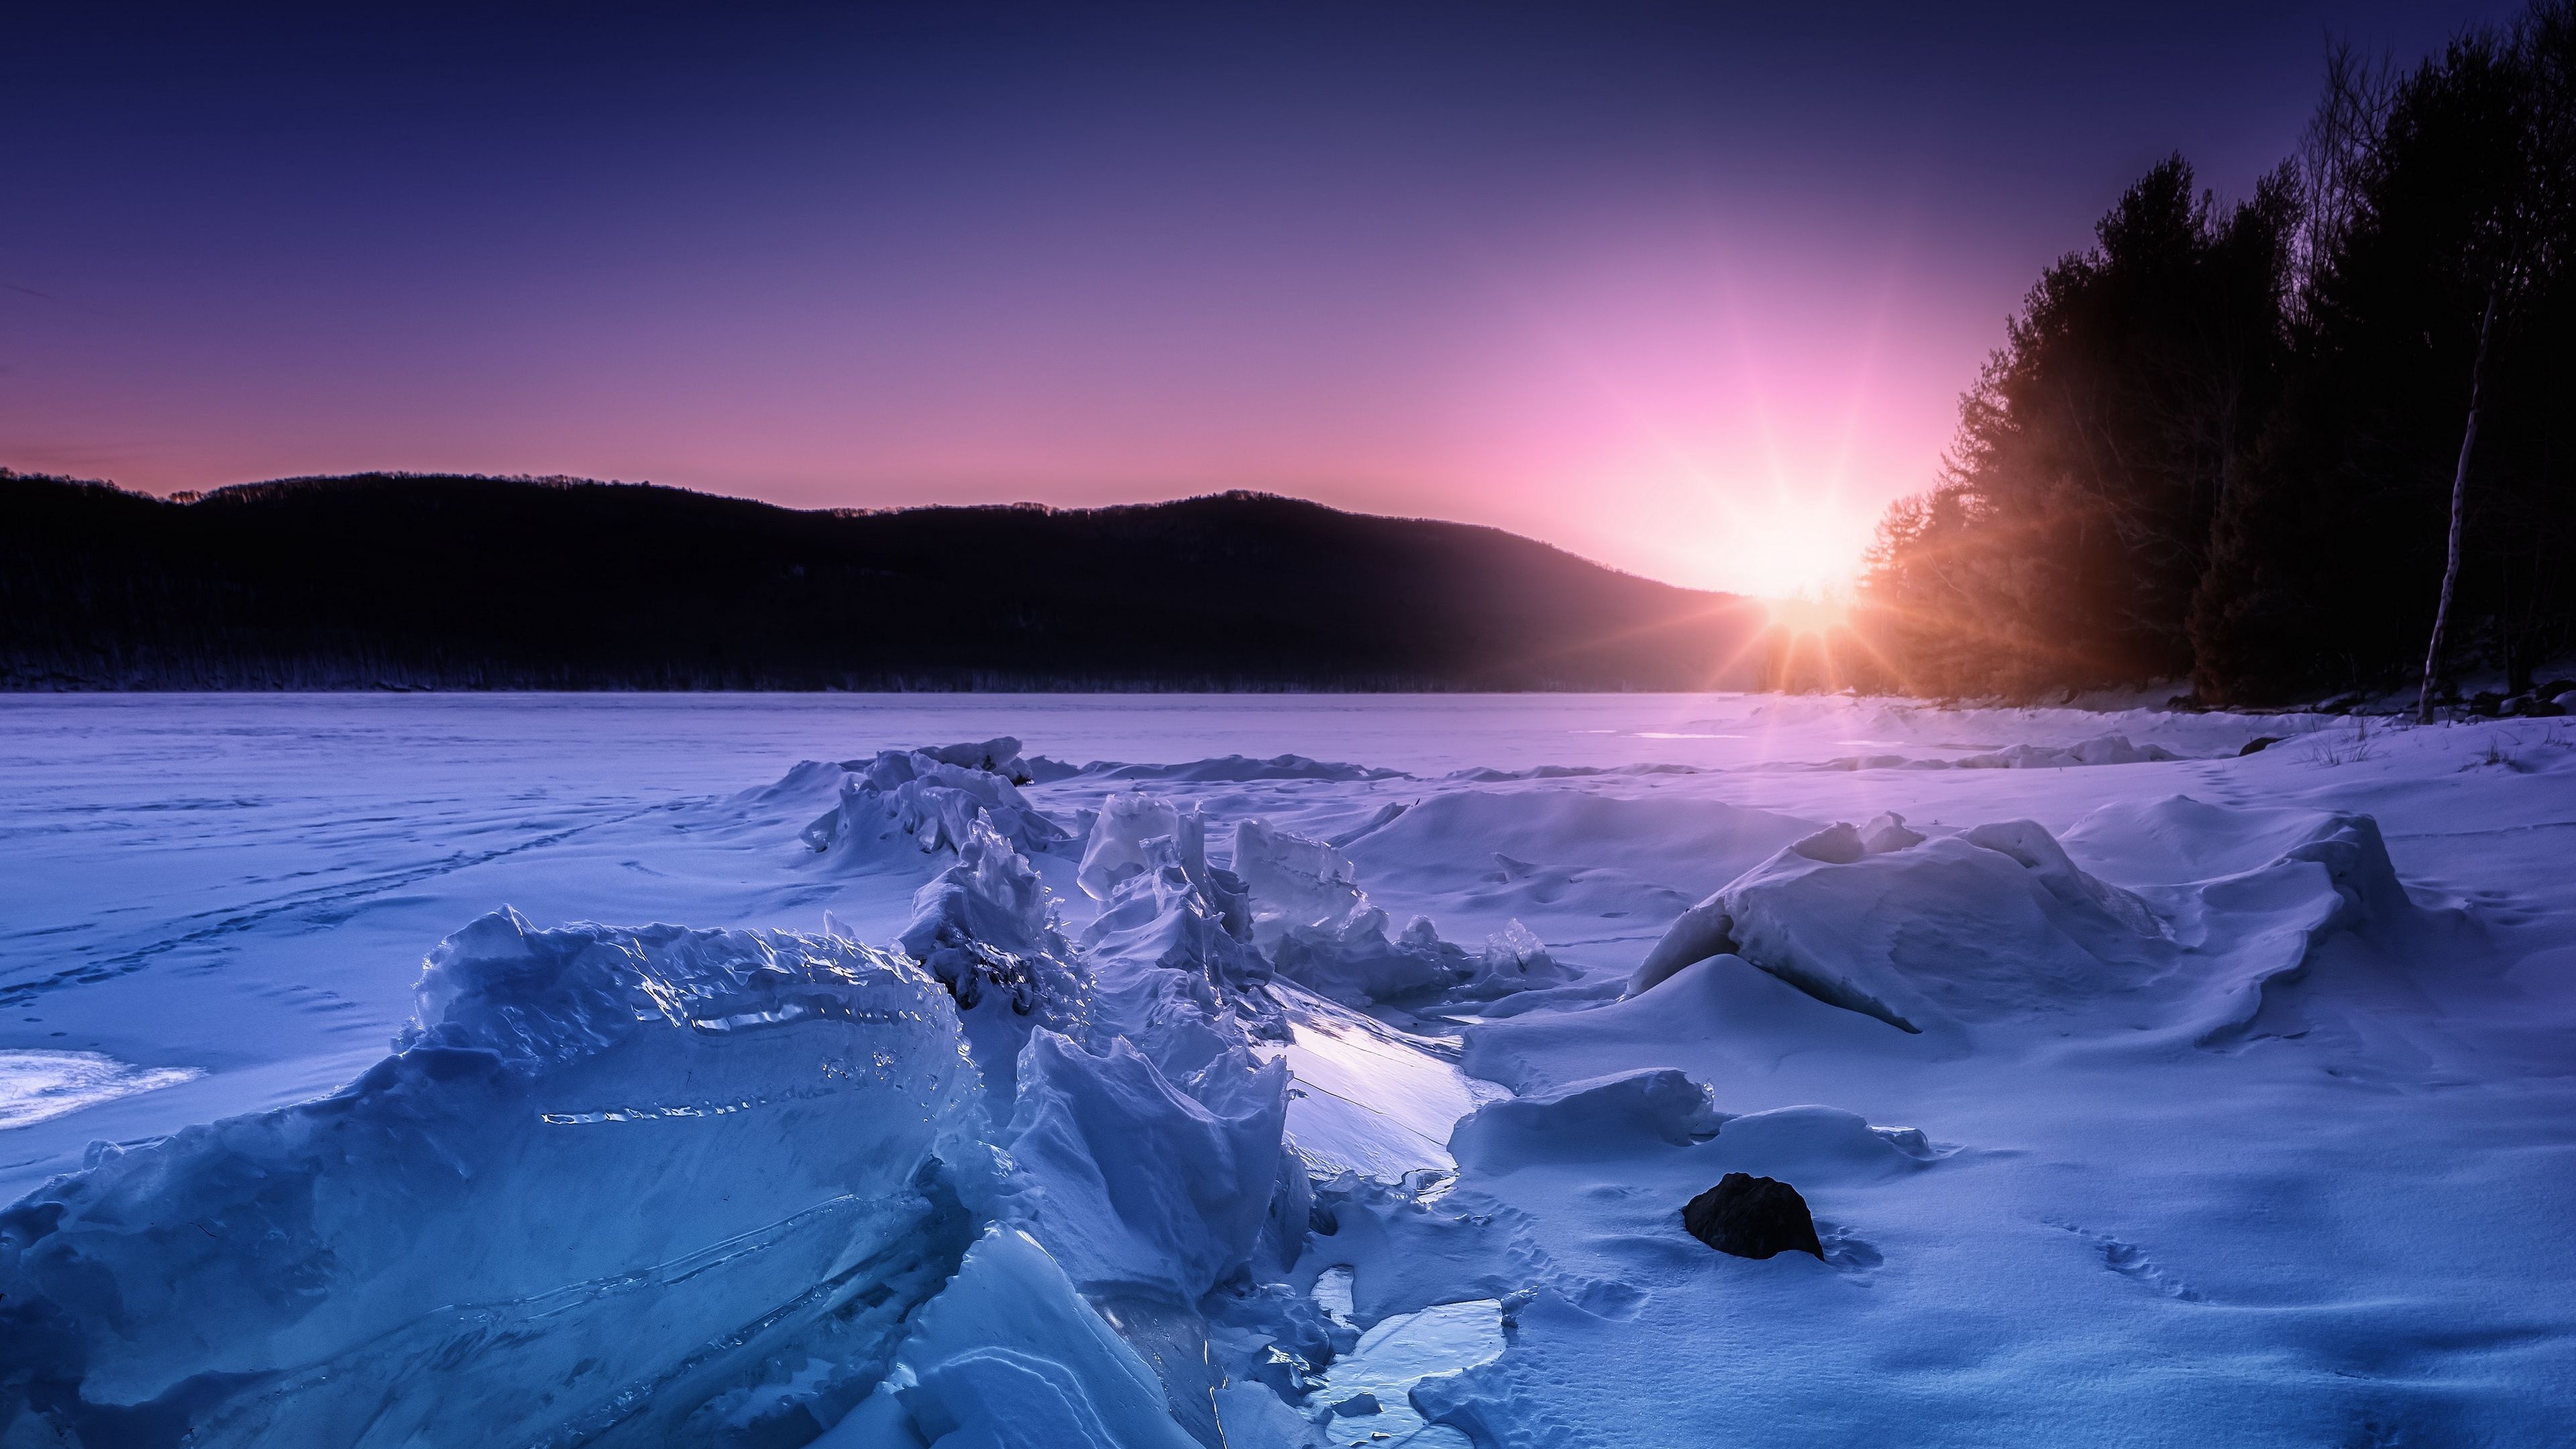 Snowy landscapes, Icy tranquility, Winter's magic, Nature's frosty touch, 3840x2160 4K Desktop